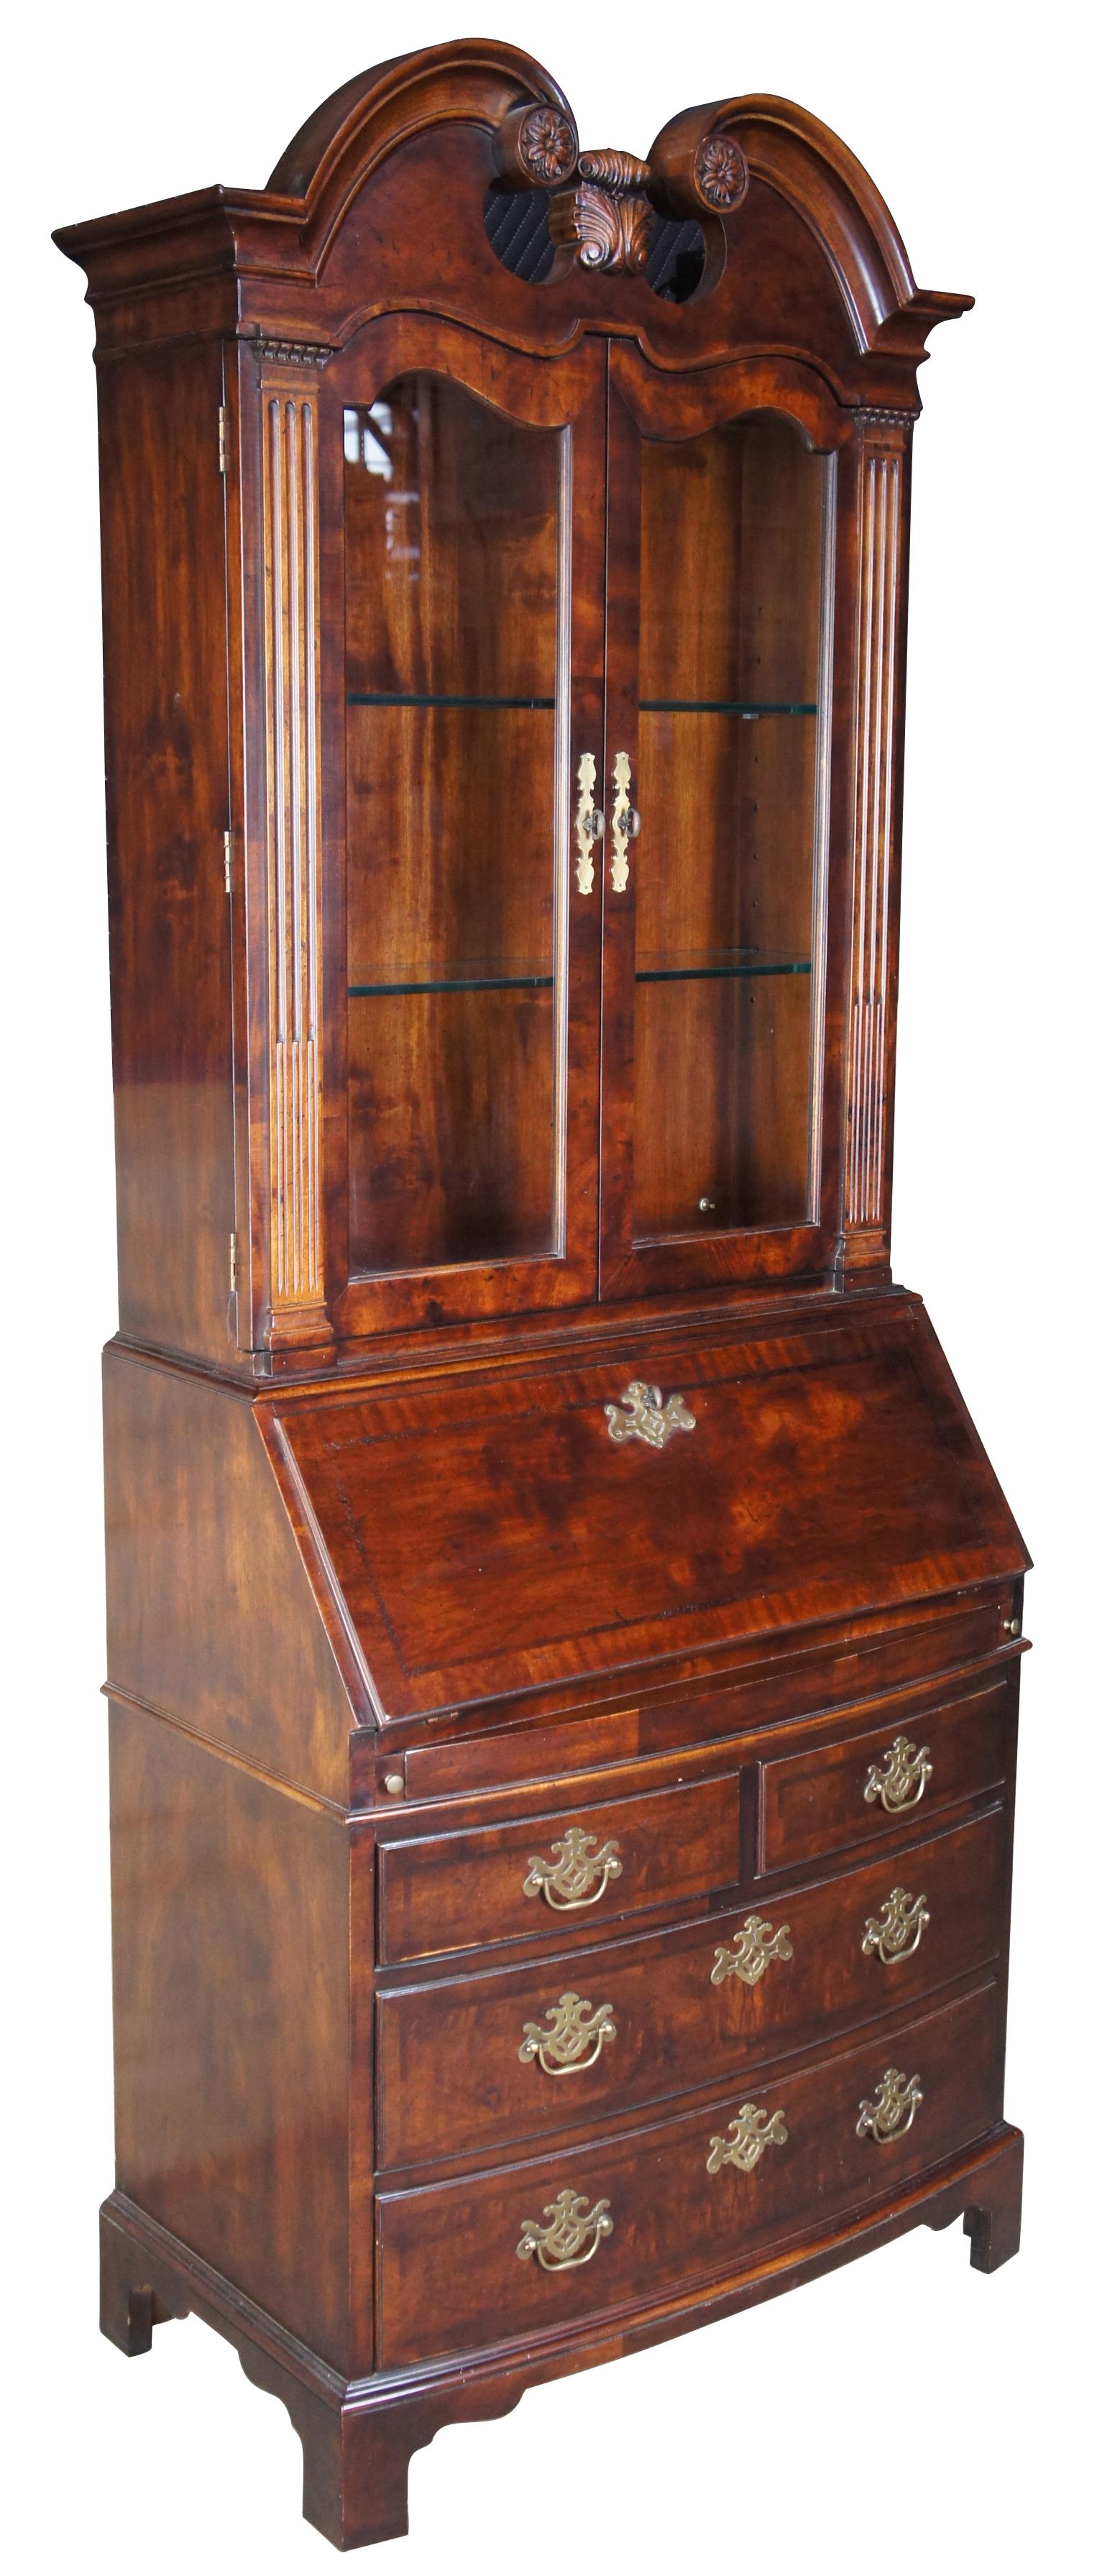 A Chippendale style bow front secretary desk by Henredon from their Folio 10 collection. Made of walnut in the USA in the late 20th century. Upper cabinet features pediment top, two adjustable glass shelves behind glass doors and is lighted. Bottom